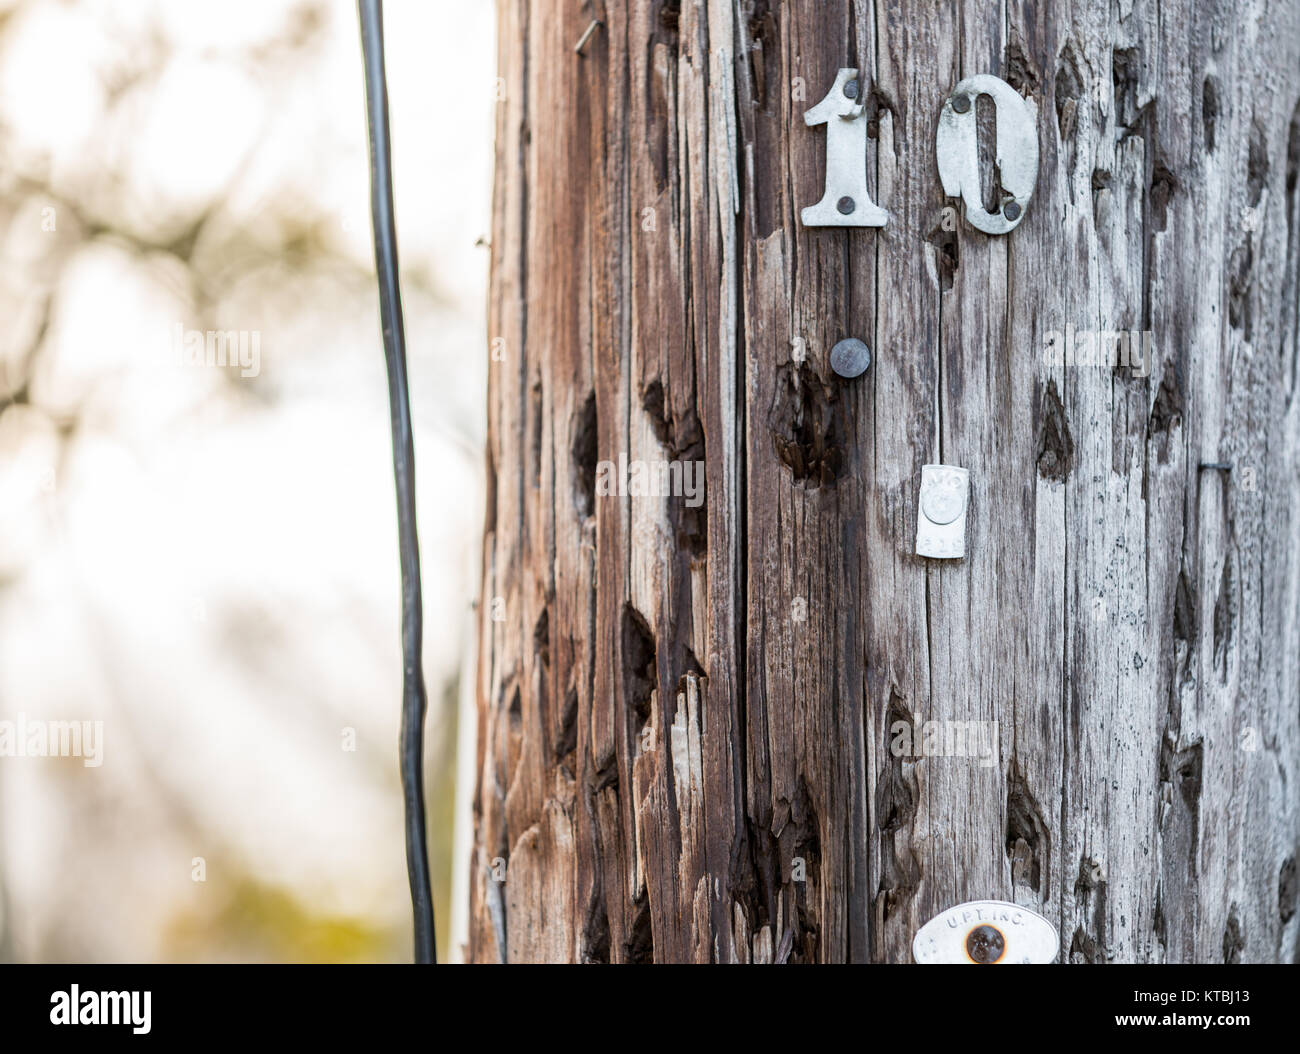 the number 19 and other tags on a section of an utilty pole Stock Photo